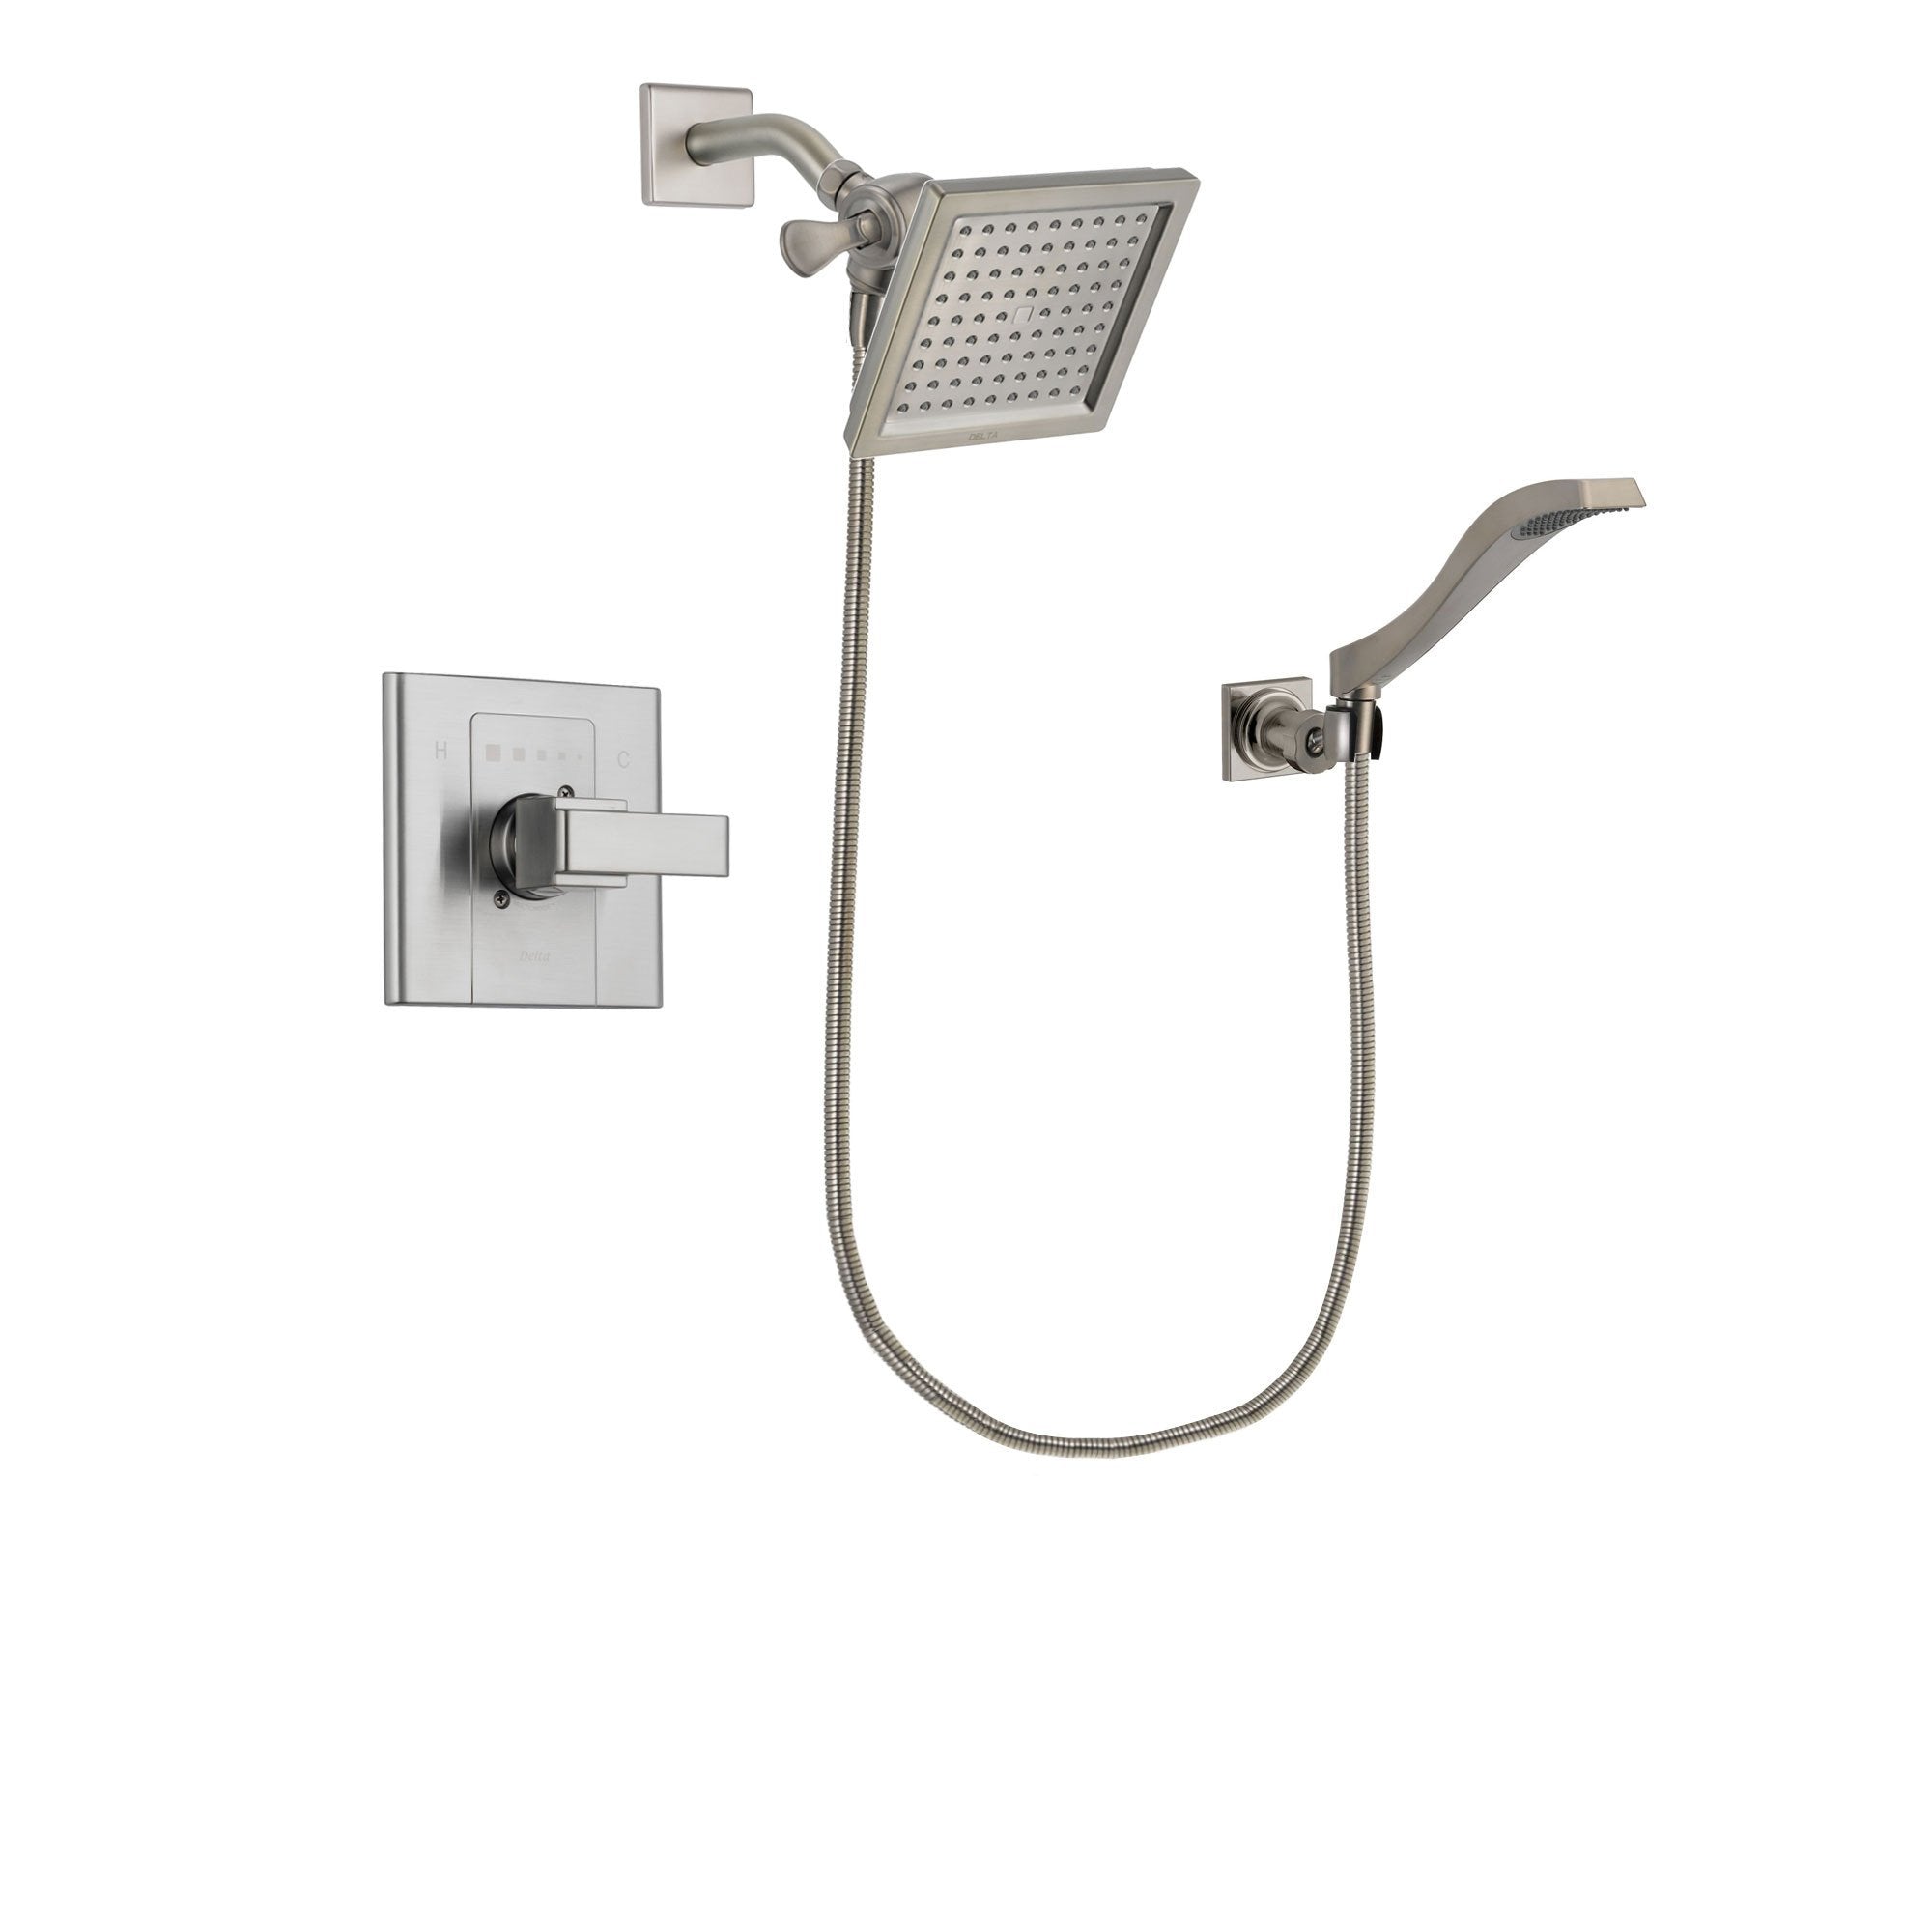 Delta Arzo Stainless Steel Finish Shower Faucet System Package with 6.5-inch Square Rain Showerhead and Modern Wall Mount Handheld Shower Spray Includes Rough-in Valve DSP2086V